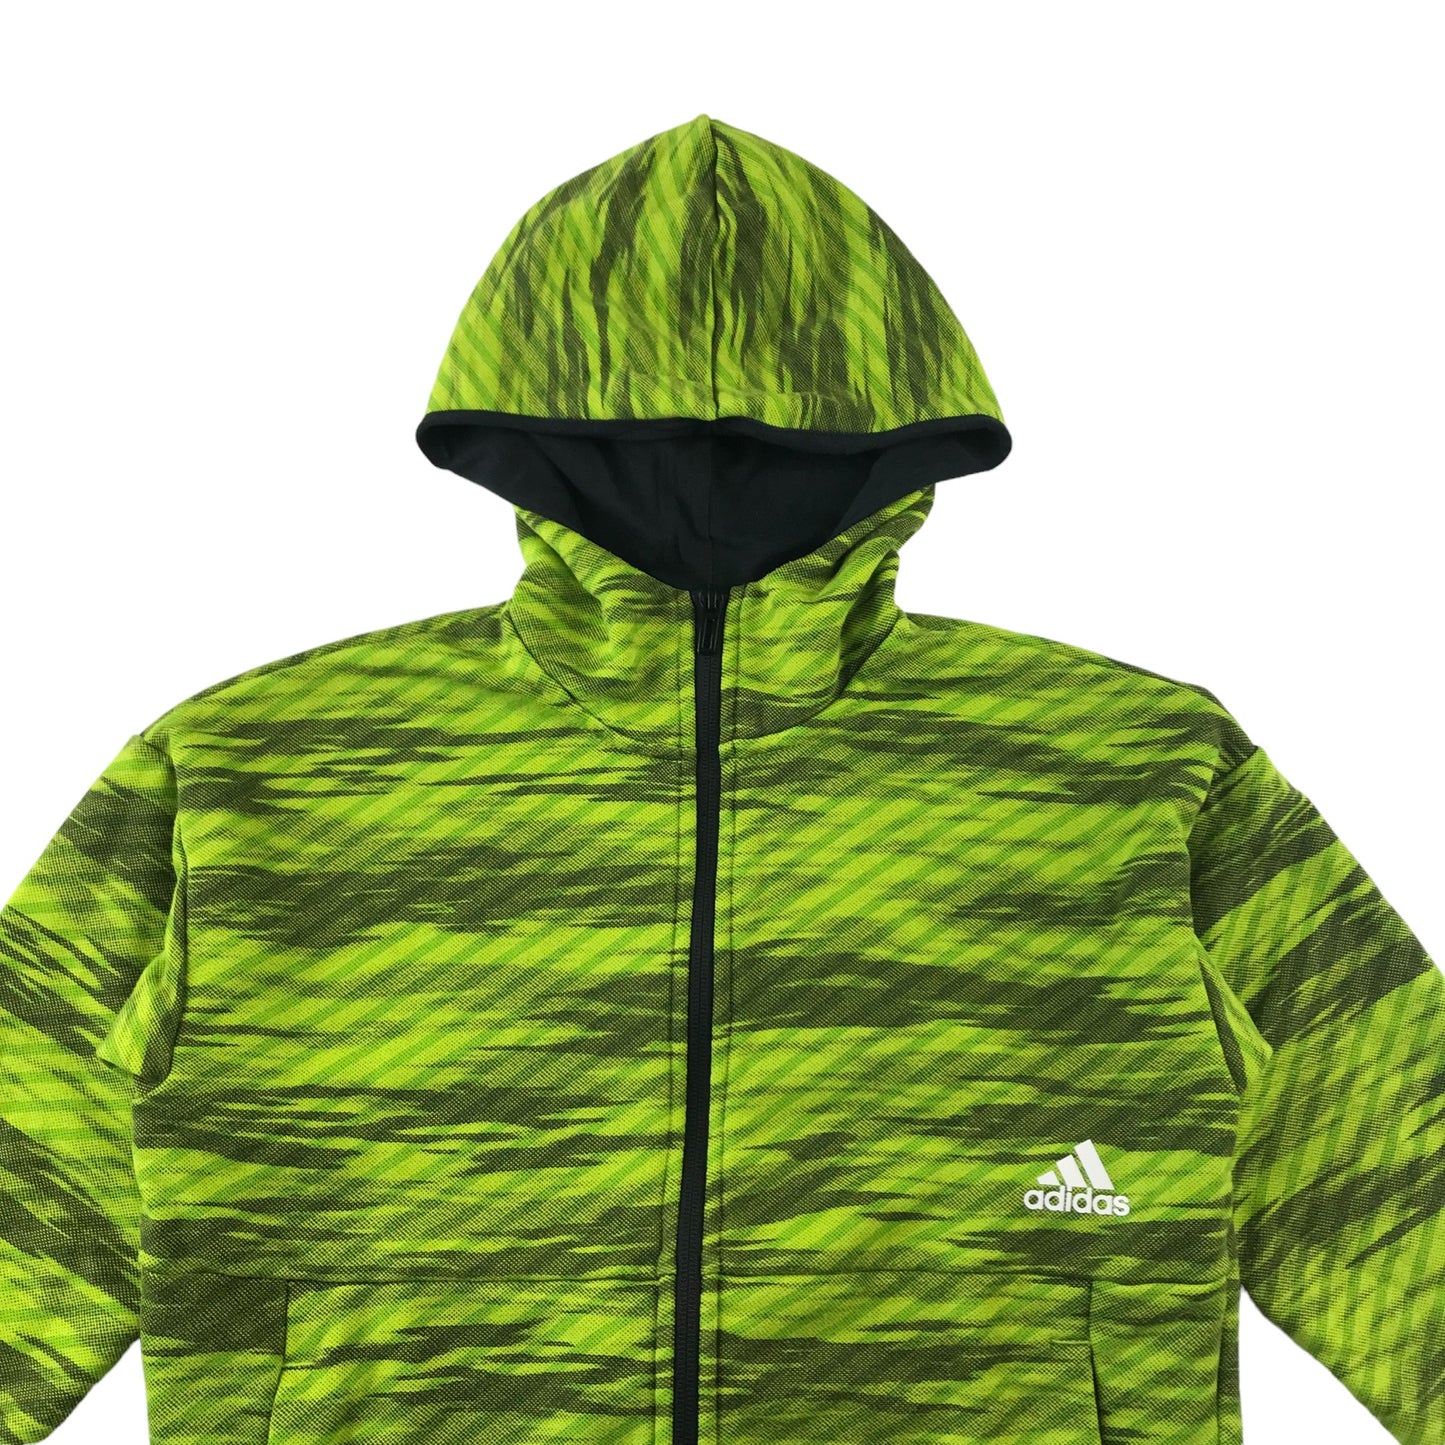 Adidas Hoodie Age 9 Green and Grey Graphic Print Pattern